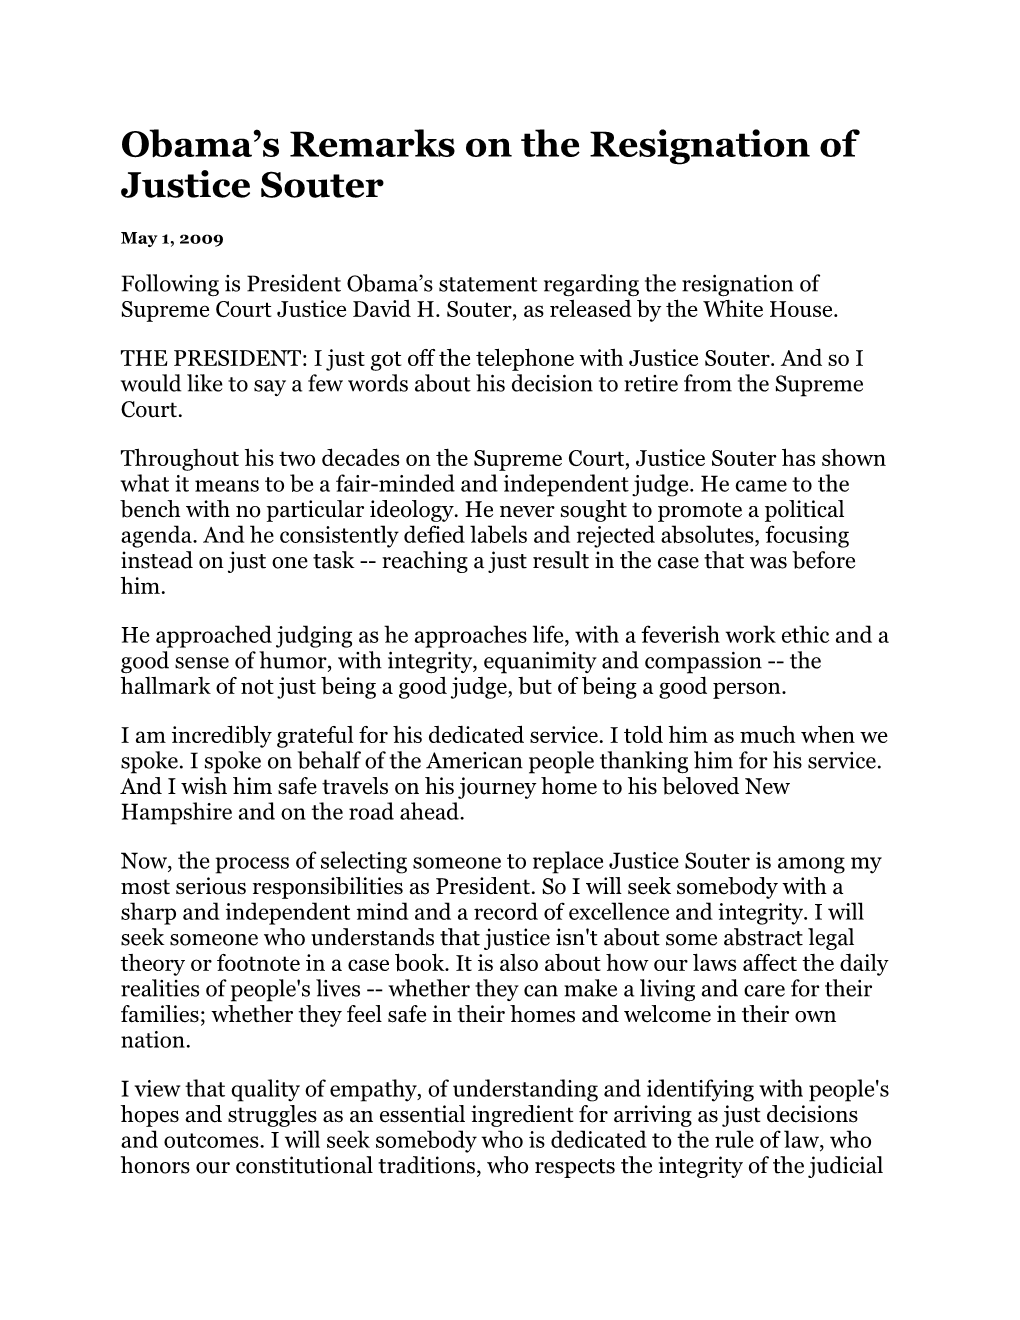 Obama S Remarks on the Resignation of Justice Souter